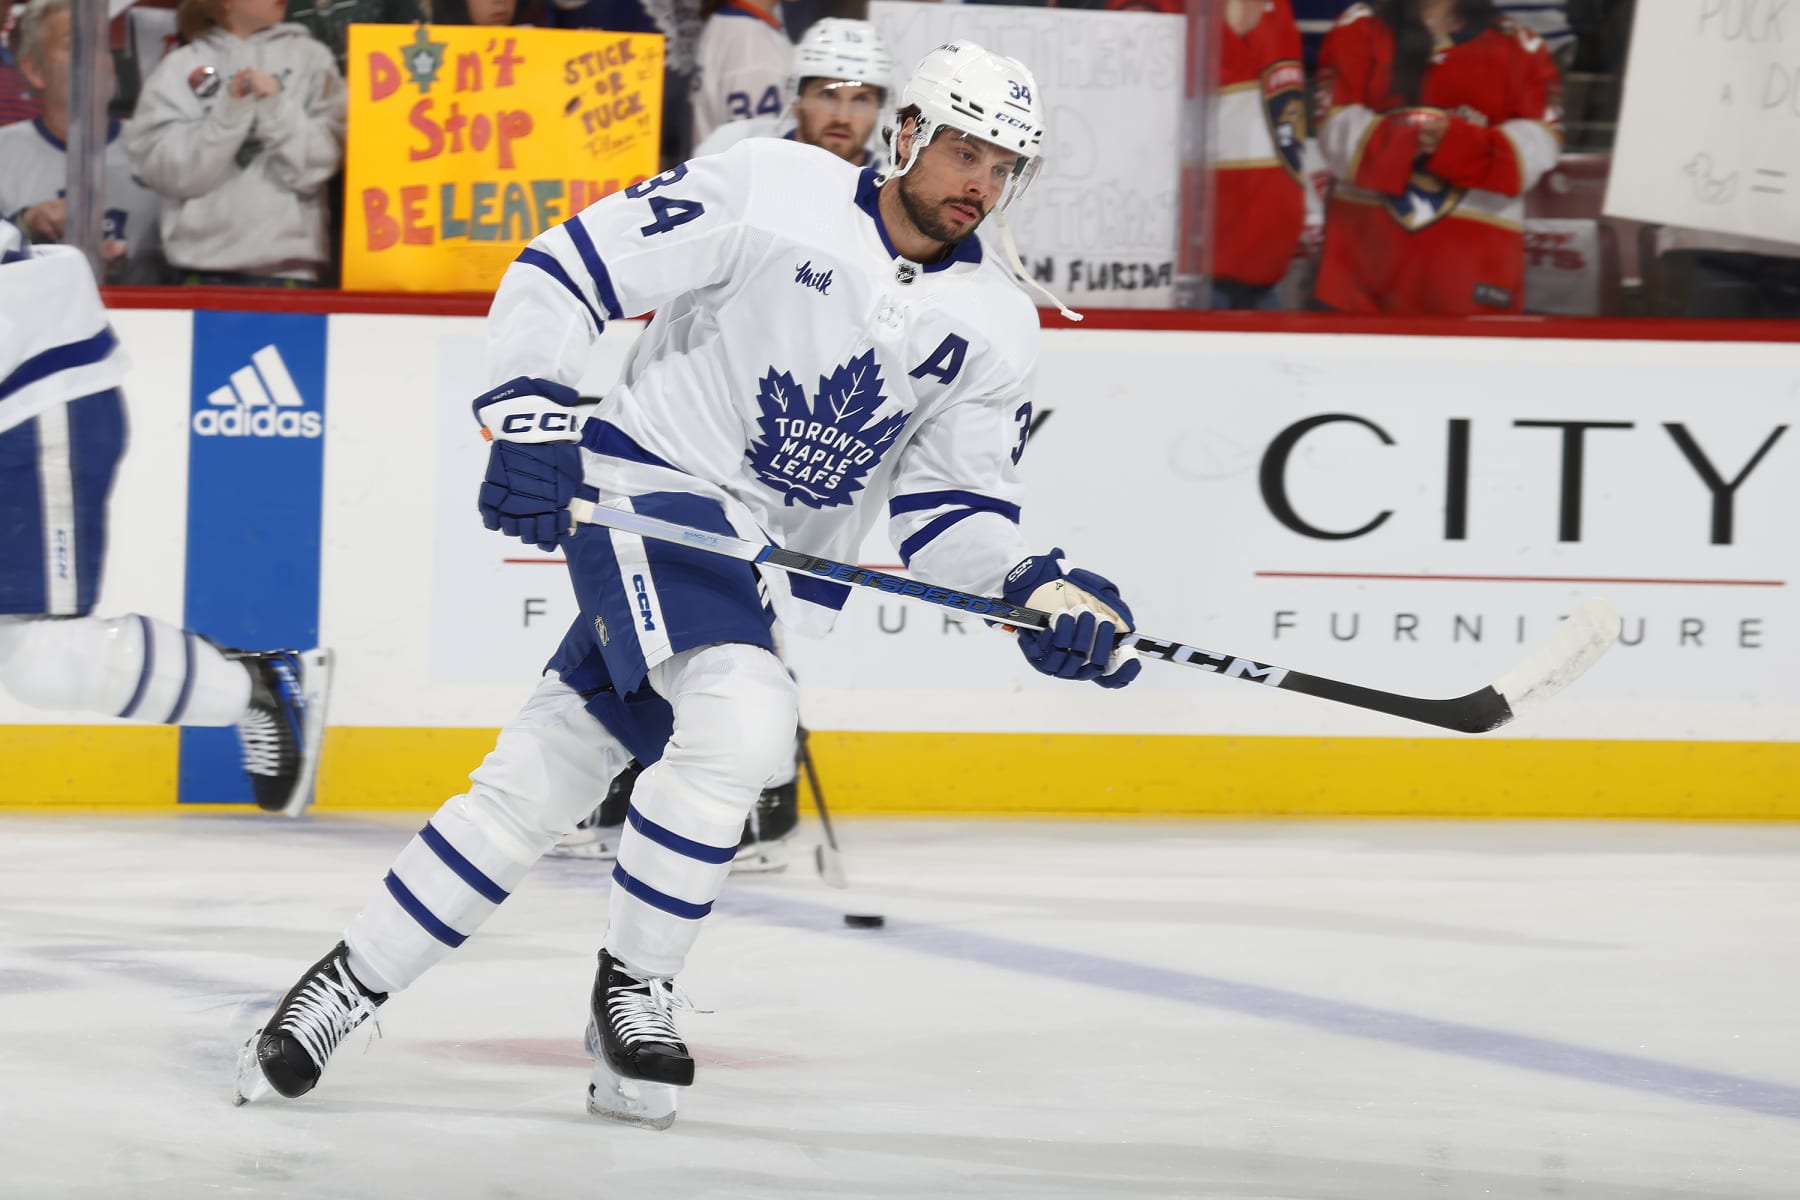 Toronto Maple Leafs player just put his $12 million home up for sale